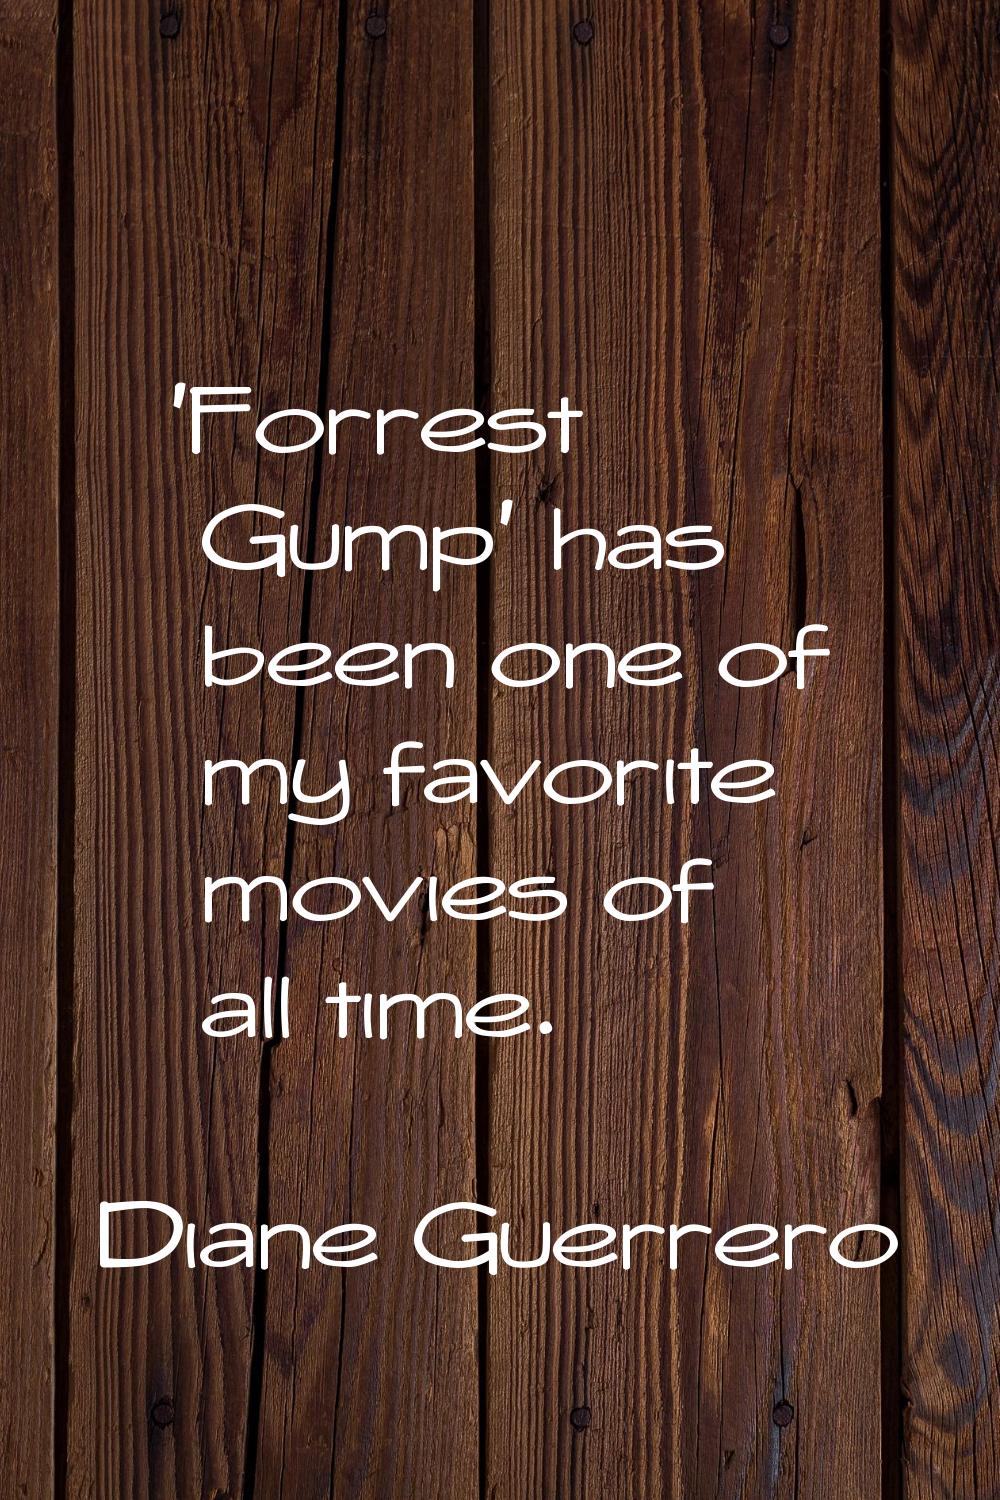 'Forrest Gump' has been one of my favorite movies of all time.